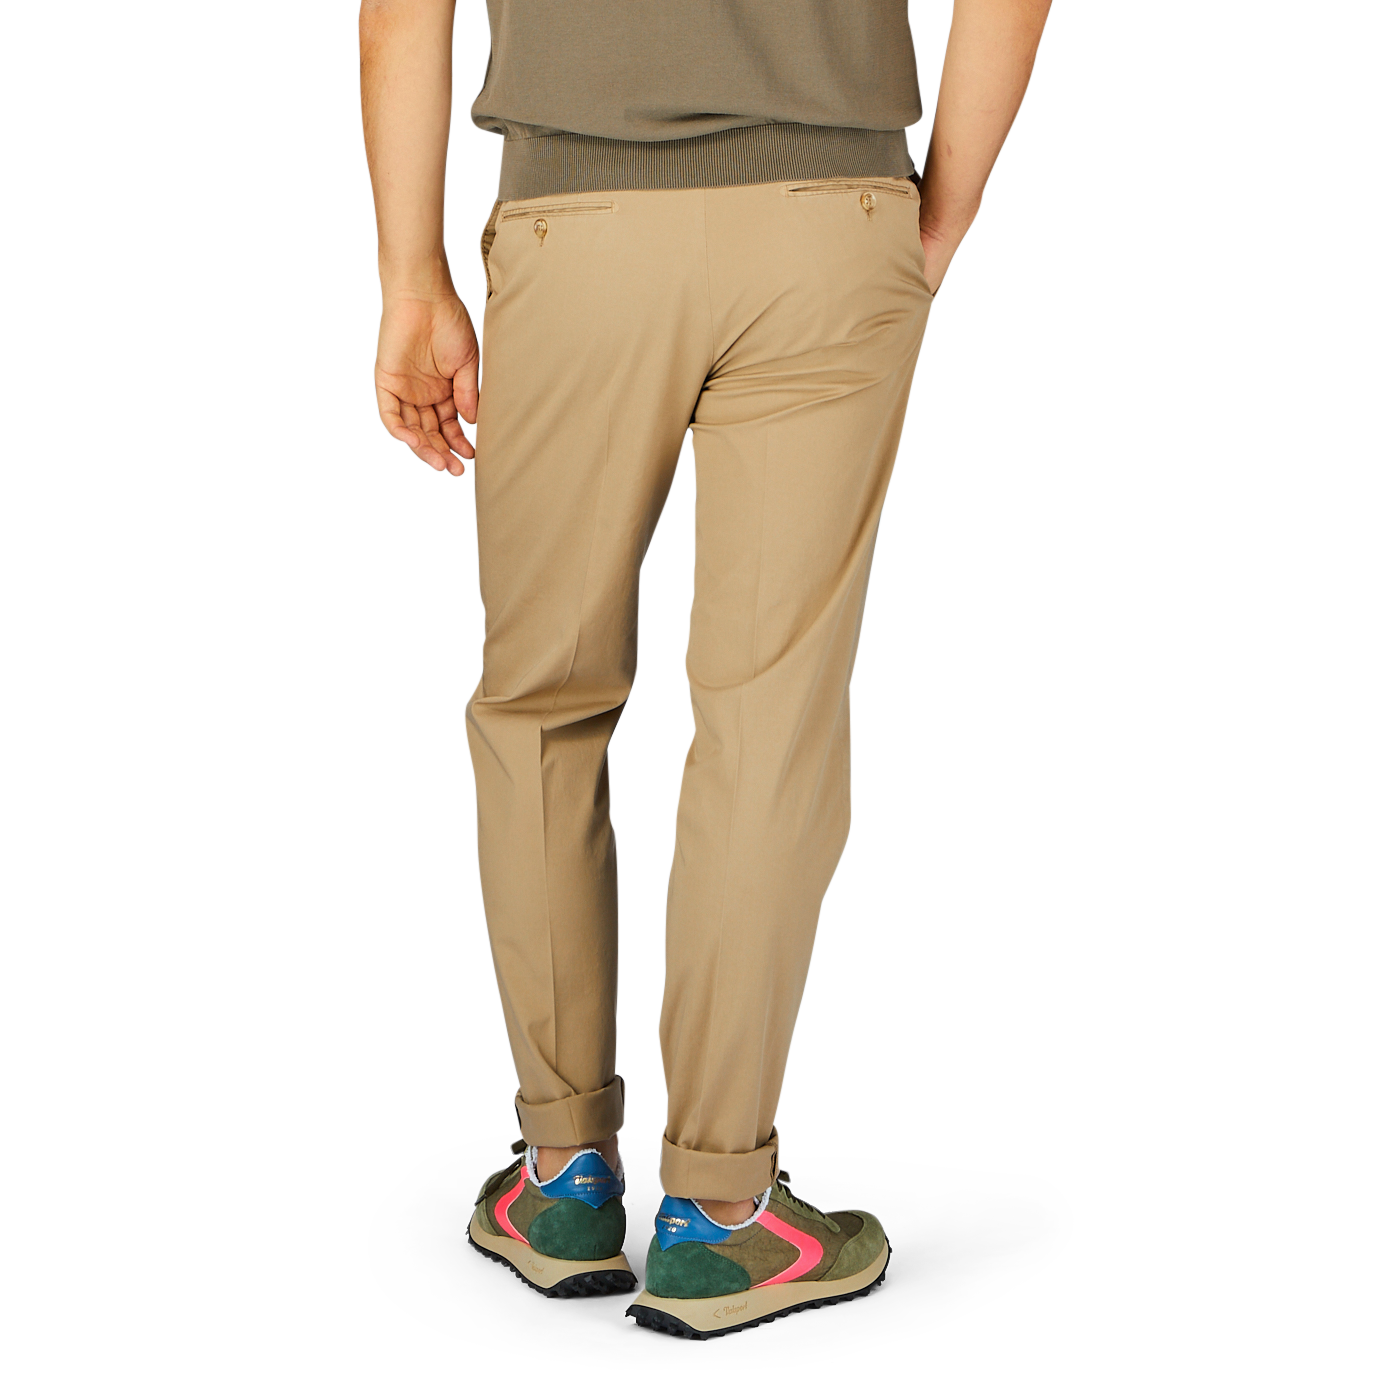 Person standing in Khaki Beige Cotton Stretch Regular Chinos and colorful Royal Batavia sneakers by Incotex.